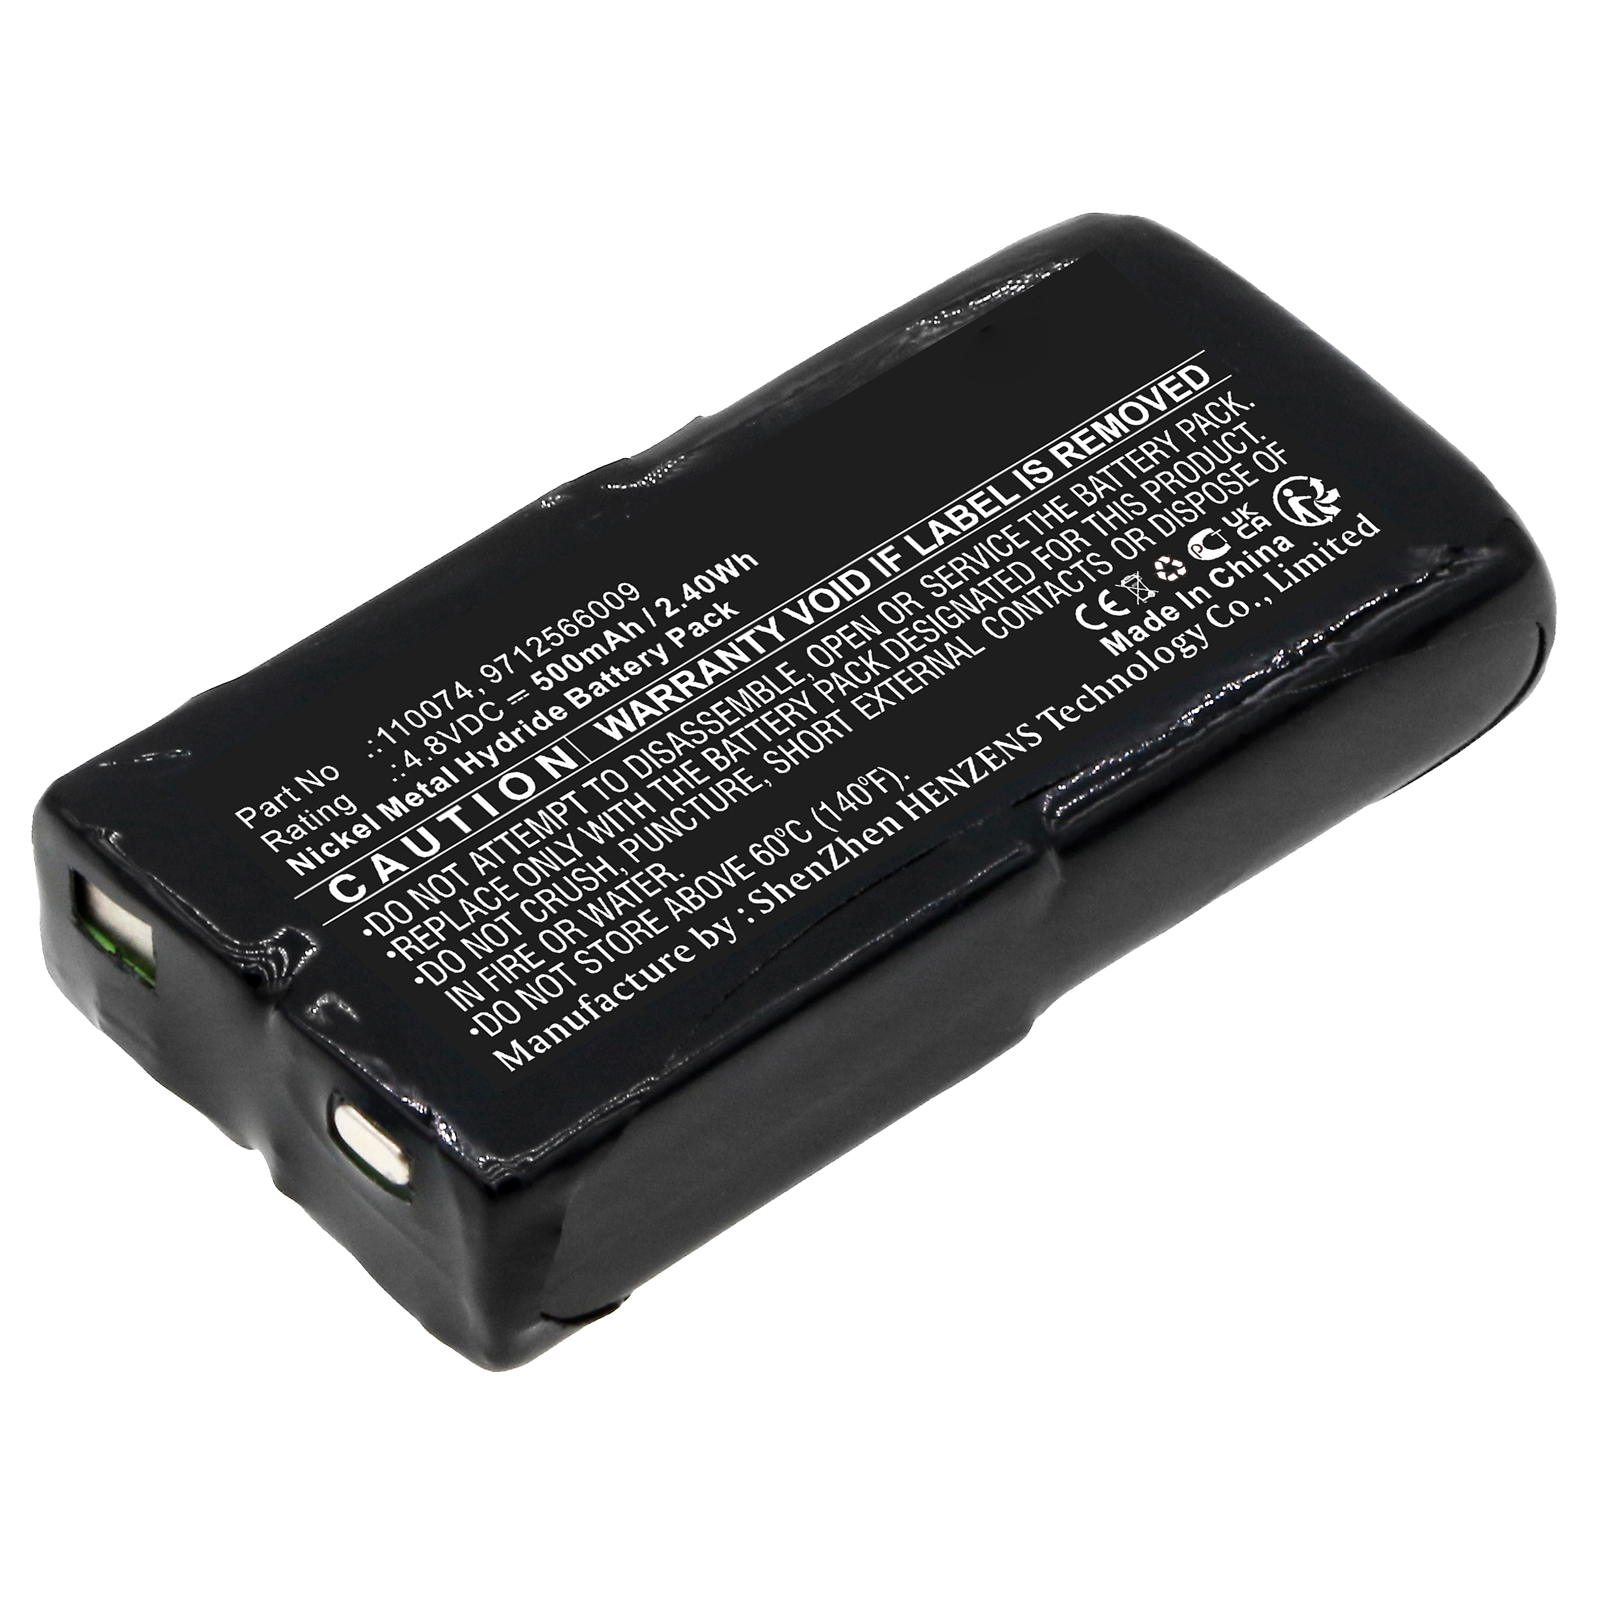 Synergy Digital Medical Battery, Compatible with Schiller 9712566009 Medical Battery (Ni-MH, 4.8V, 500mAh)